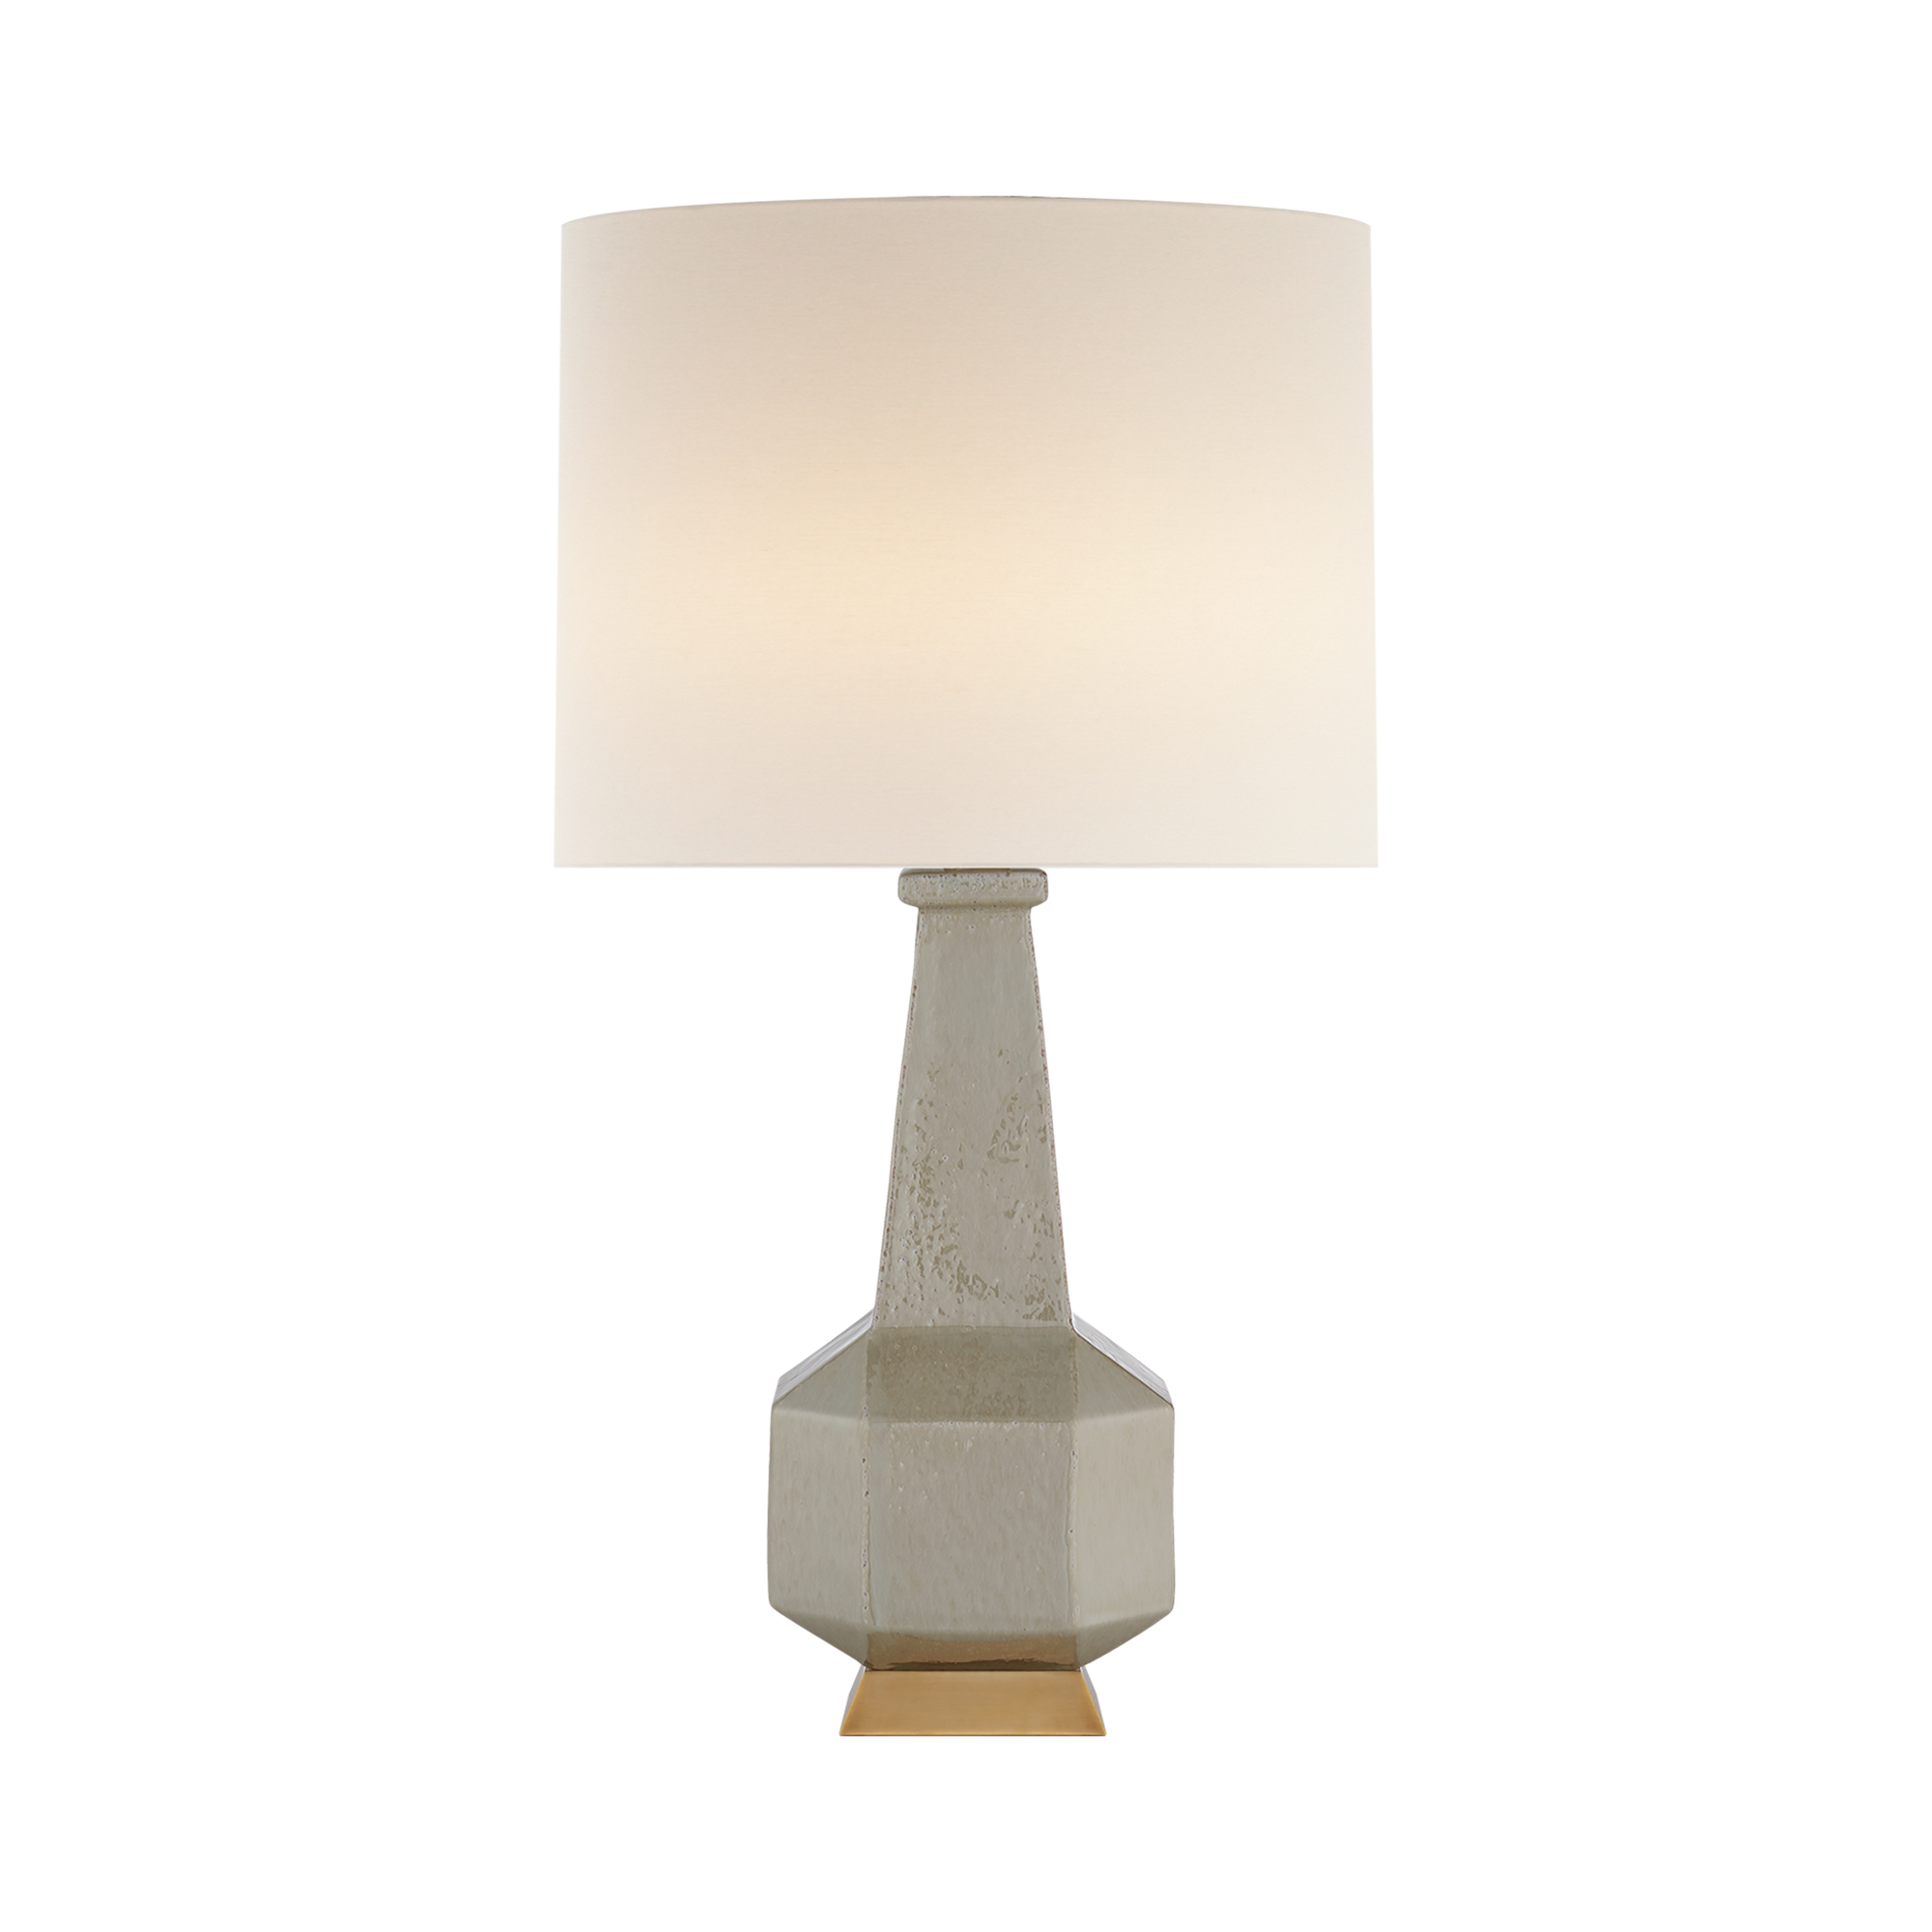 The Babette Table Lamp is inspired by old world glamour and European midcentury design.